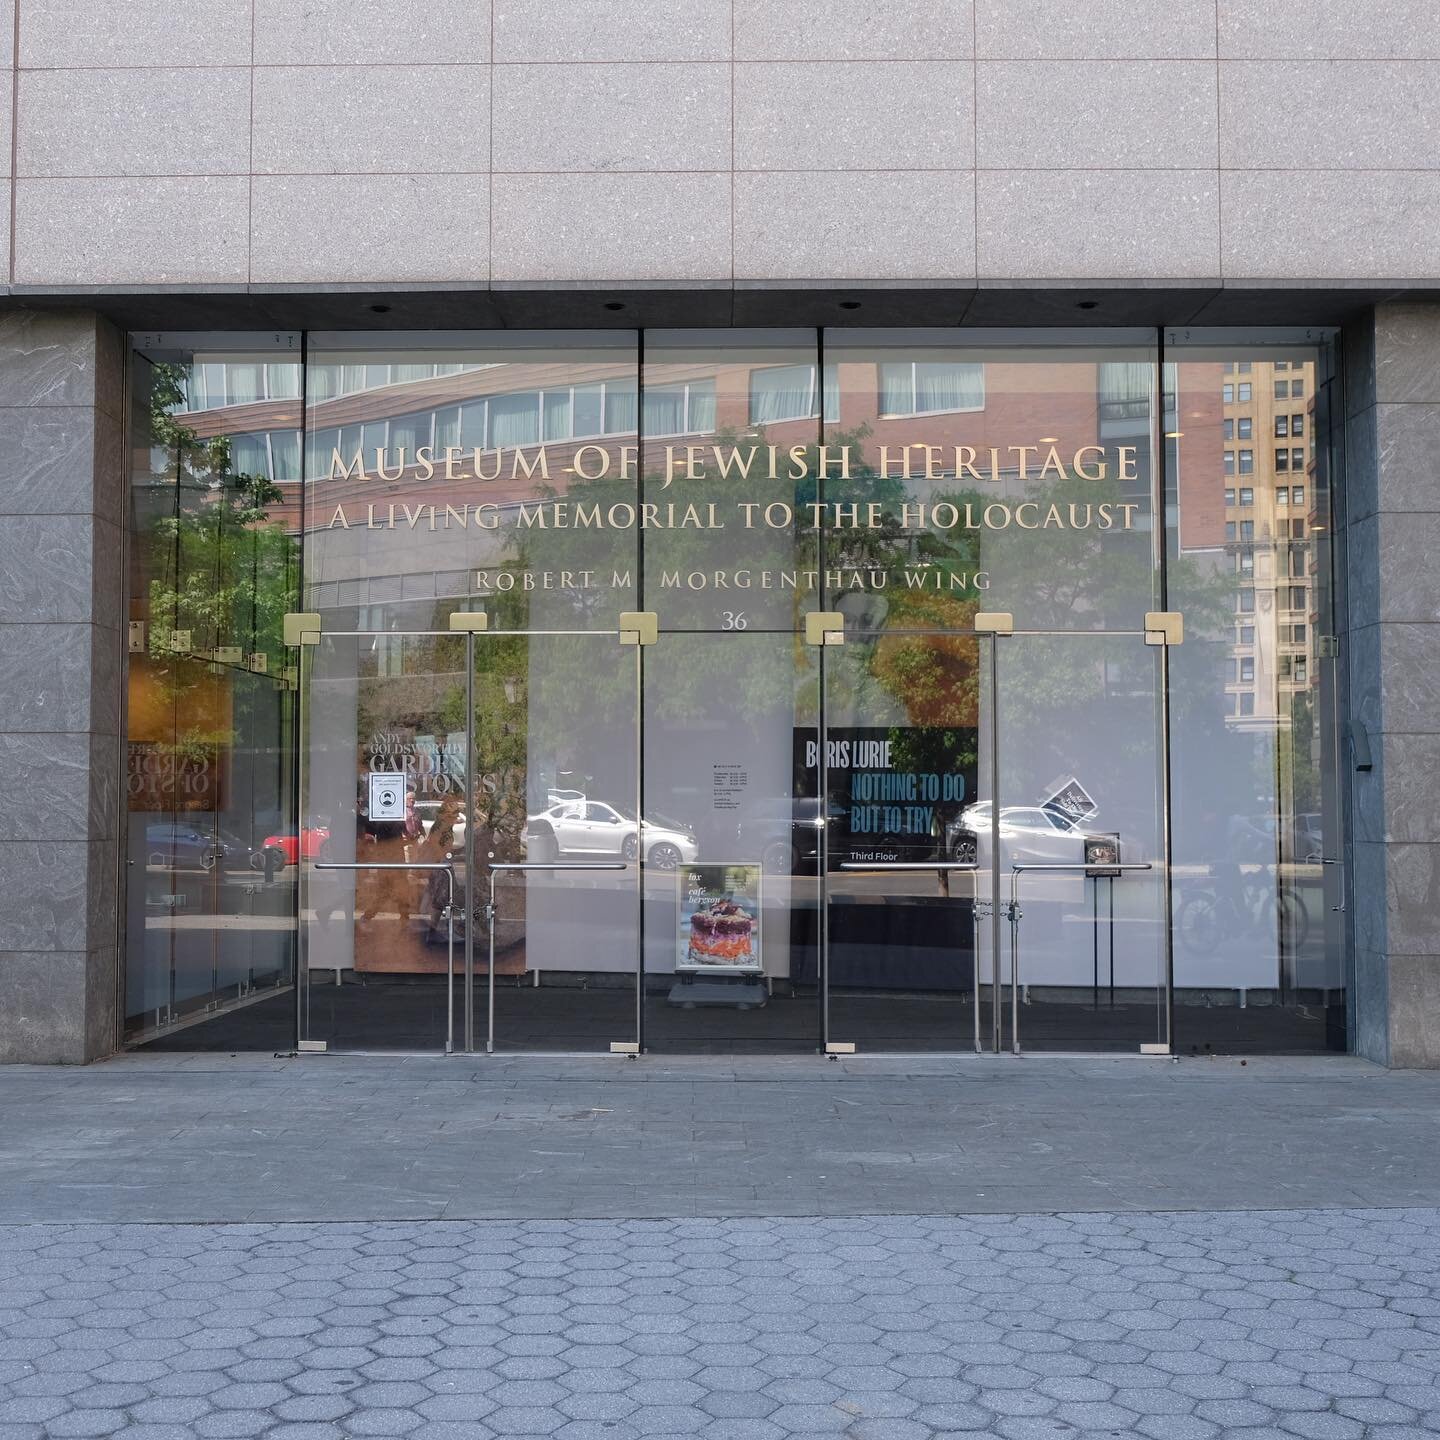 Our Favorite Friday this week is&hellip;

The Museum of Jewish Heritage &ndash; A Living Memorial to the Holocaust🏛️
What better way to learn about the history and mobilize memory than through rich collections to illuminate the Jewish experience, en